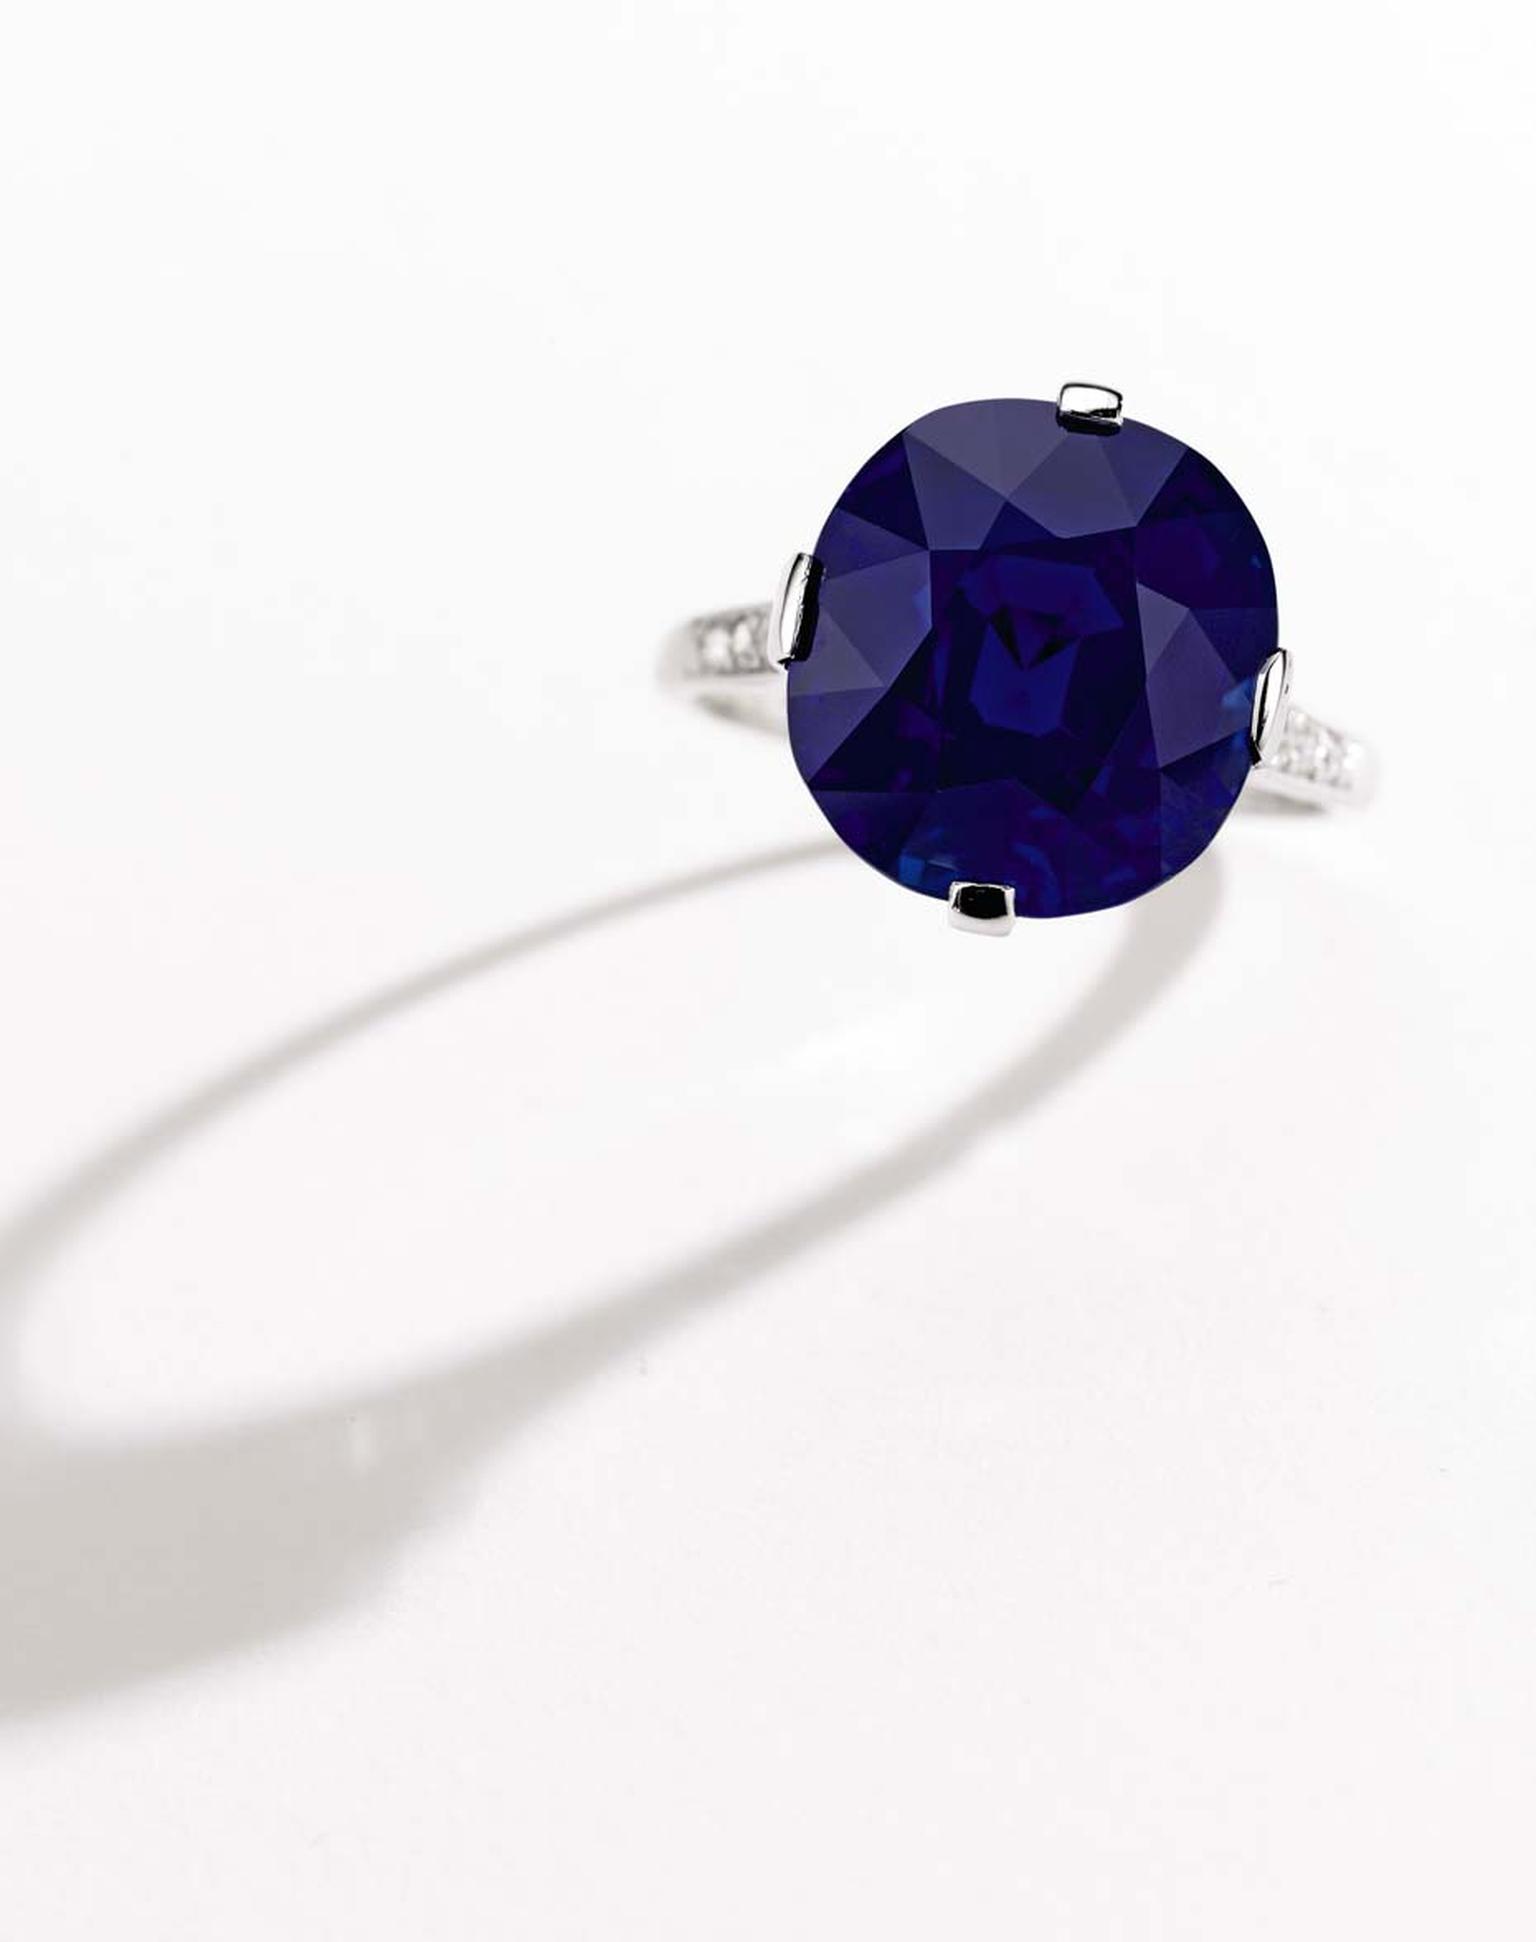 Cartier Kashmir sapphire and diamond ring in platinum, circa 1915, set with a finely proportioned cut 11.90ct sapphire, sold to an online bidder for $1.9 million.